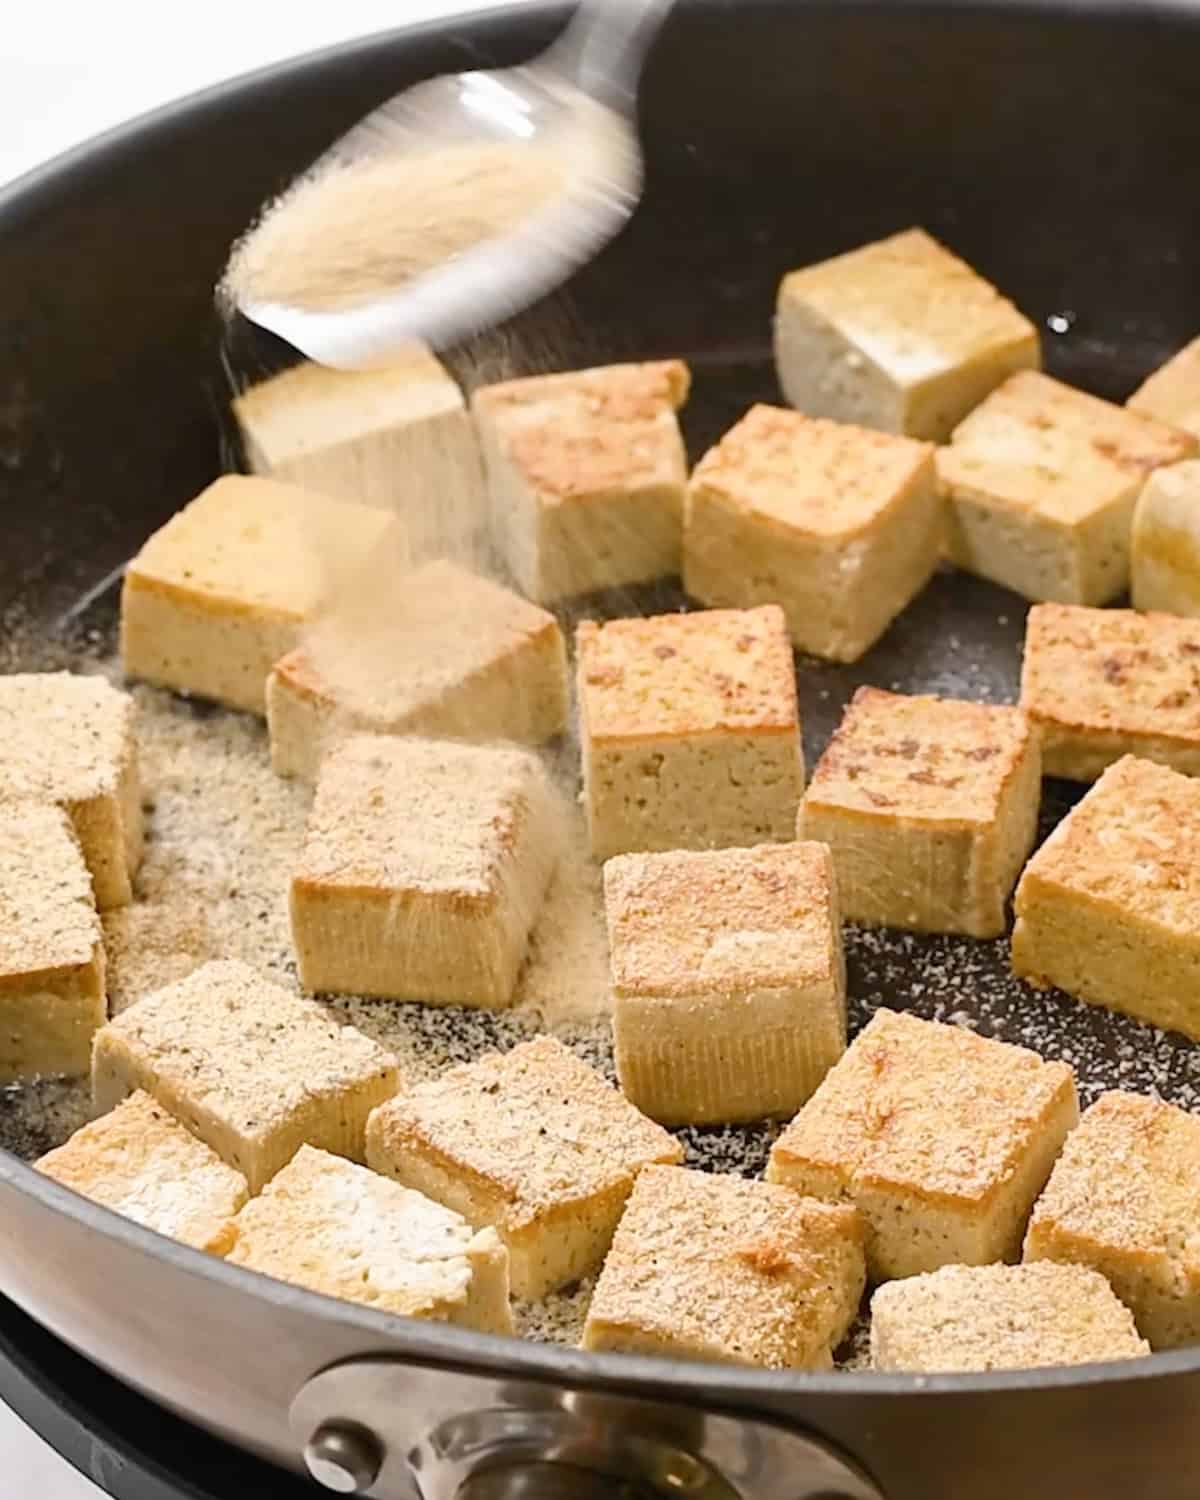 spice mixture being sprinkled over tofu in a pan